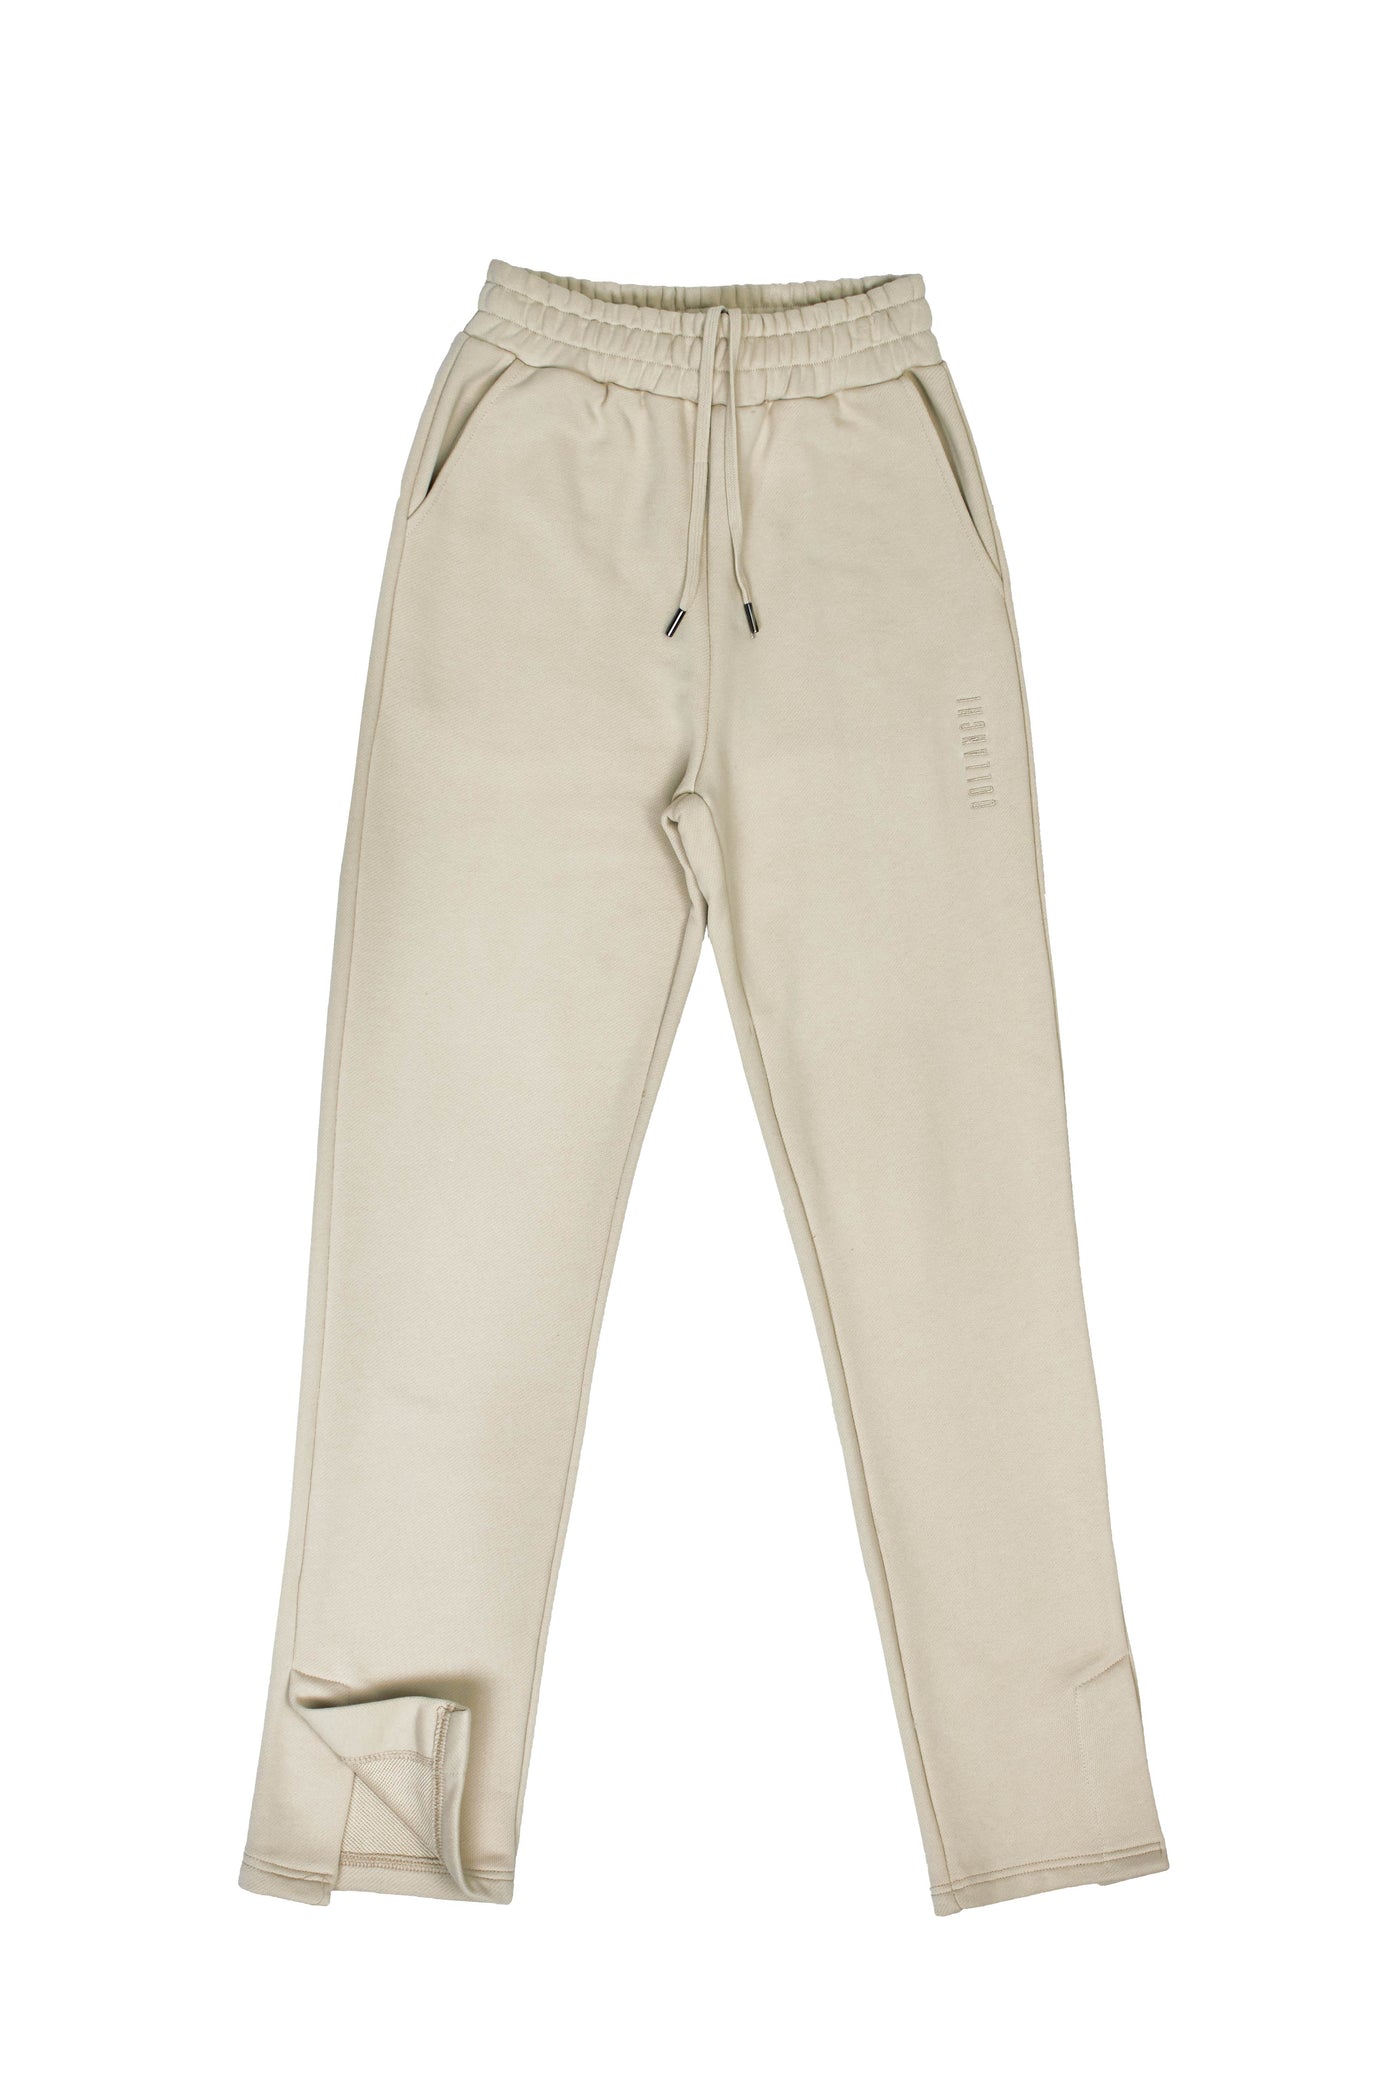 Maia Sweatpant - Oyster Gray